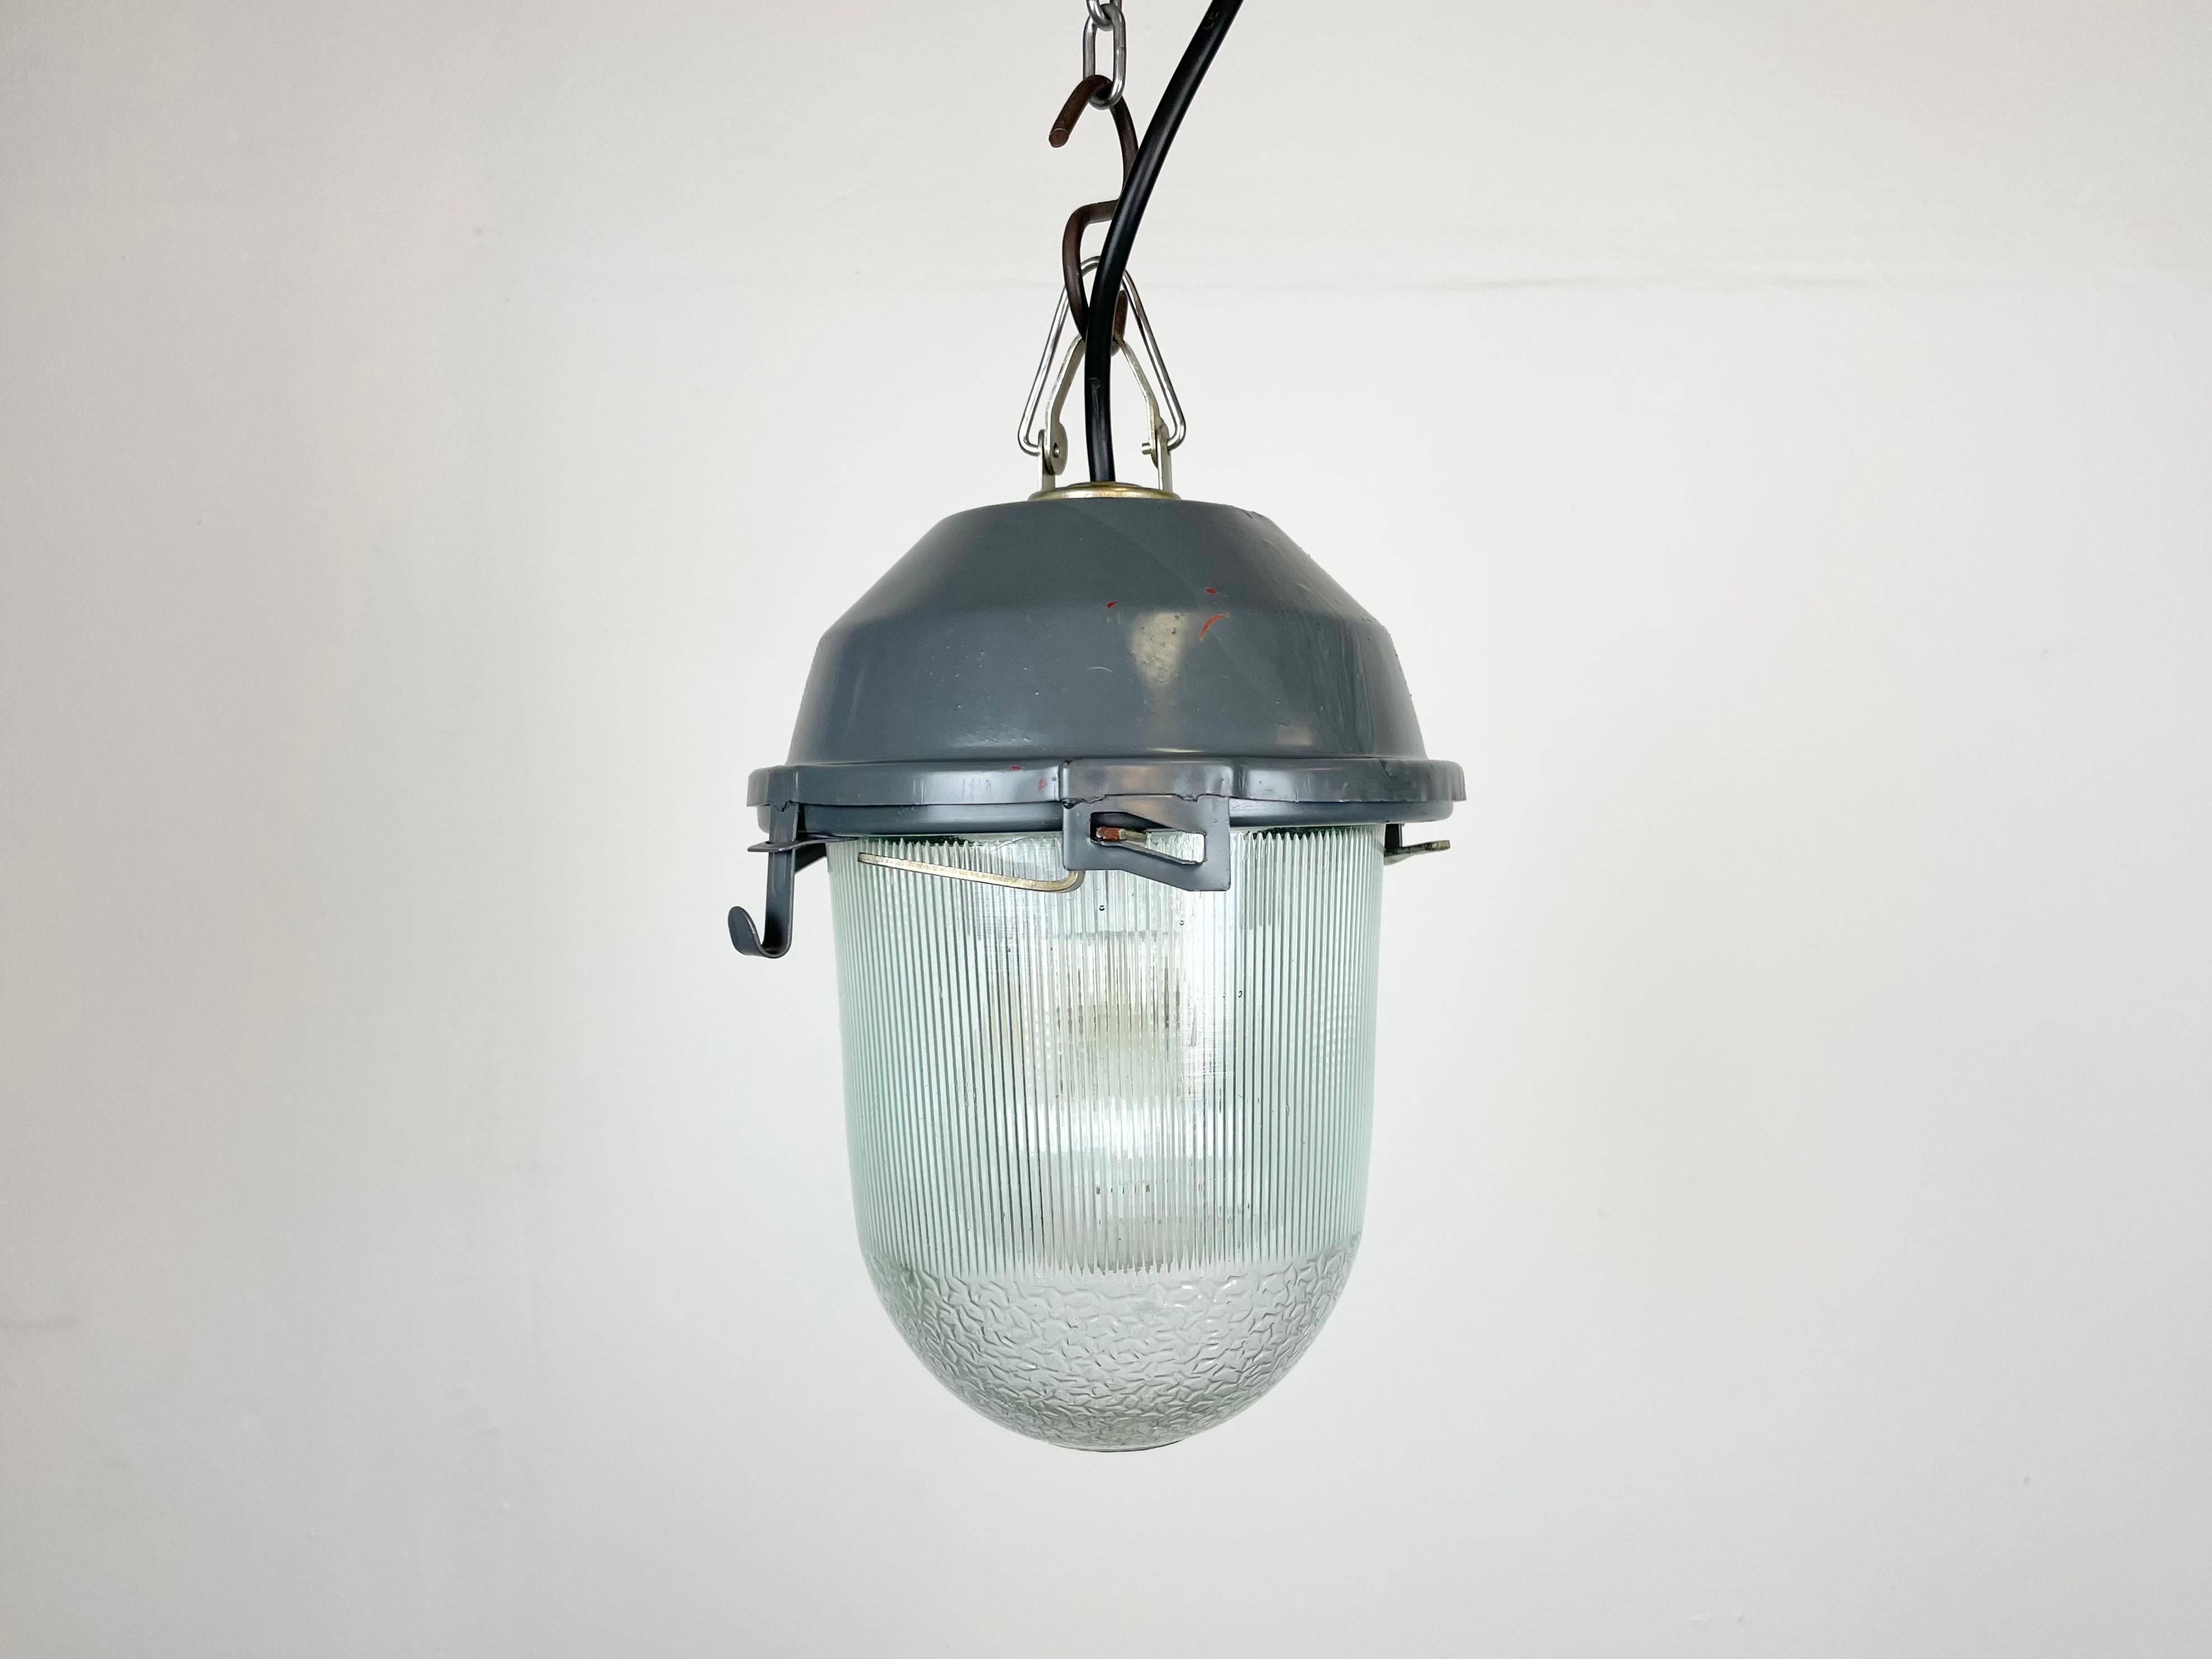 - Vintage Industrial lamp from the 1970s 
- Made in former Soviet Union
- Grey iron top
- Stripped glass cover
- The socket requires E 27 lightbulbs 
- New wire 
- Diameter: 15 cm
- Weight : 1,5 kg.